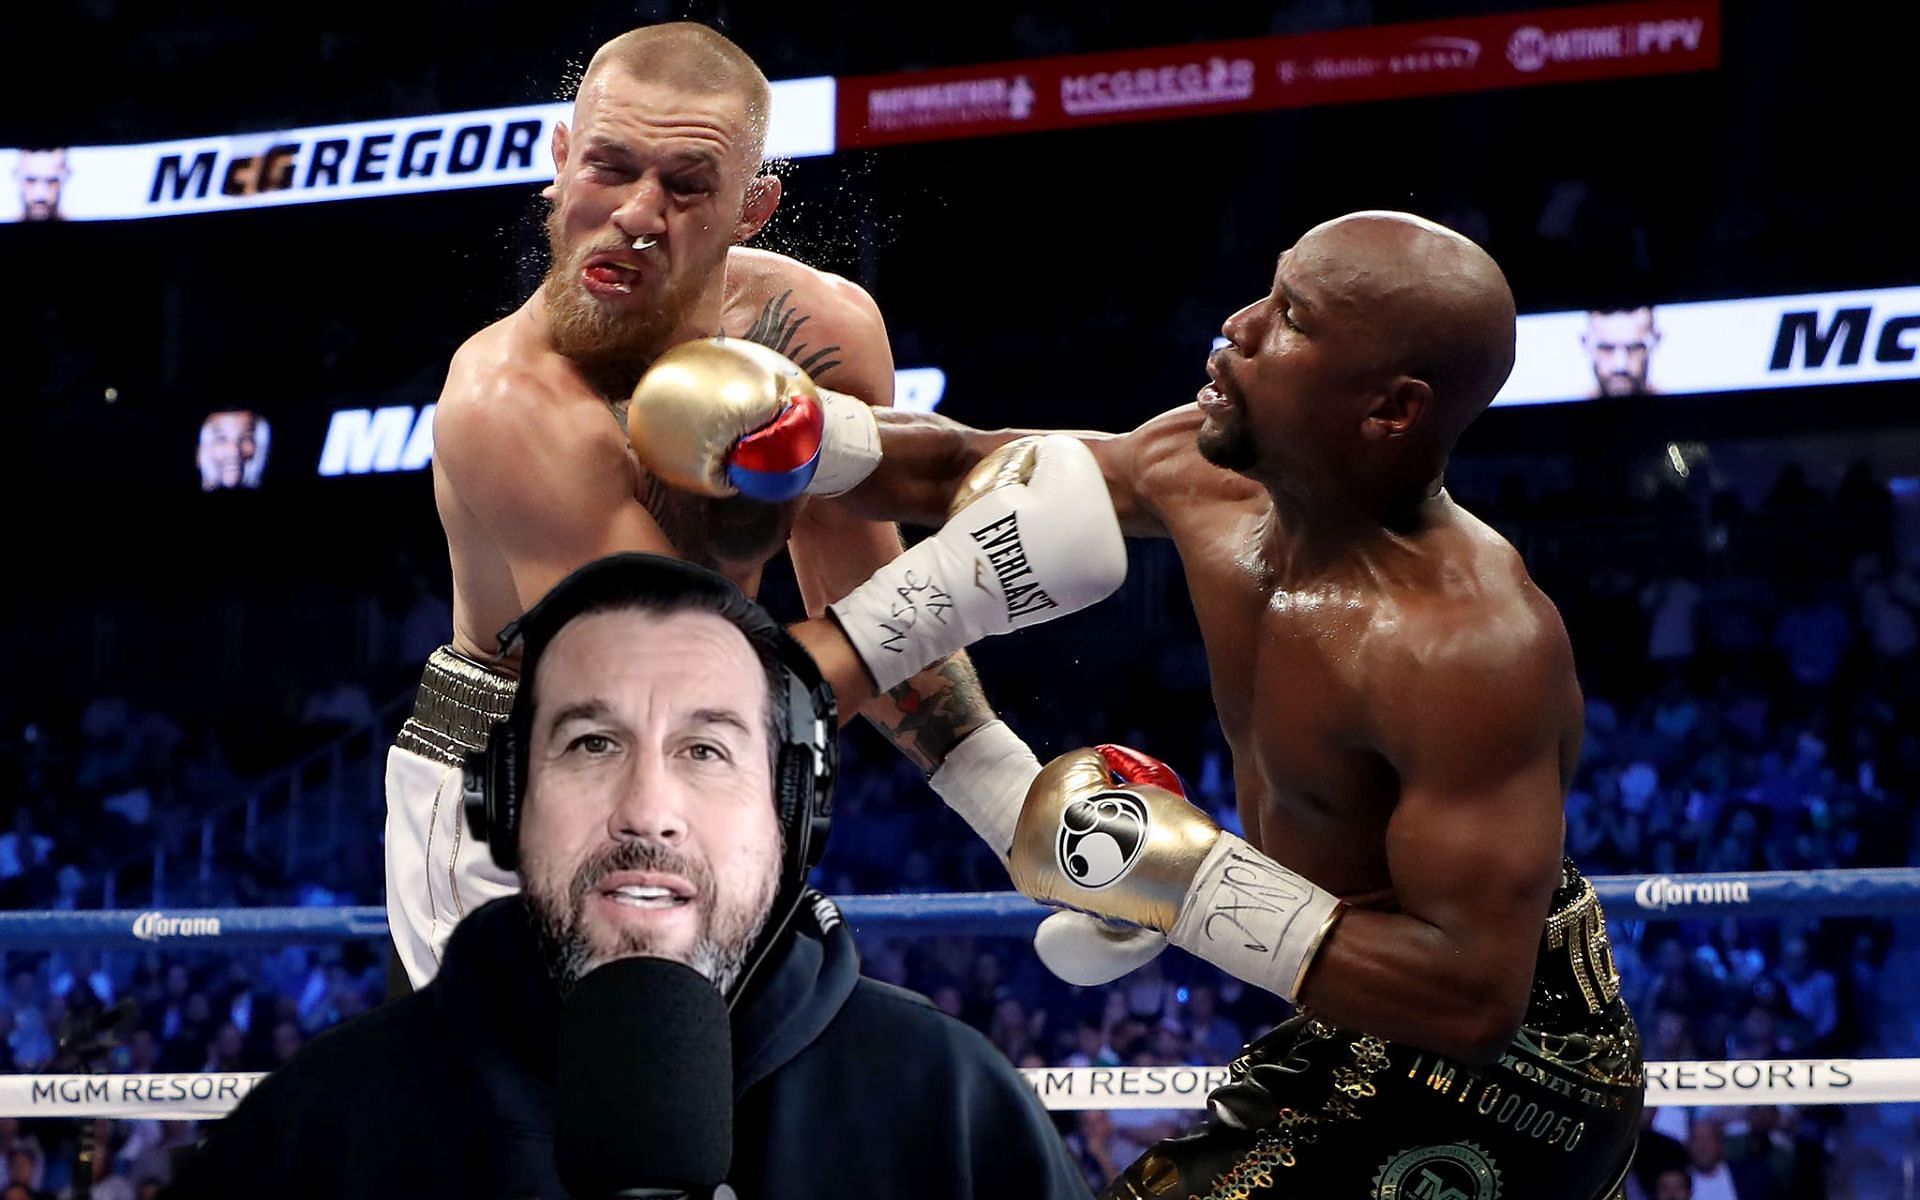 John McCarthy (left), Conor McGregor (center), and Floyd Mayweather (right) (Images via Getty and YouTube/MMAWeekly)